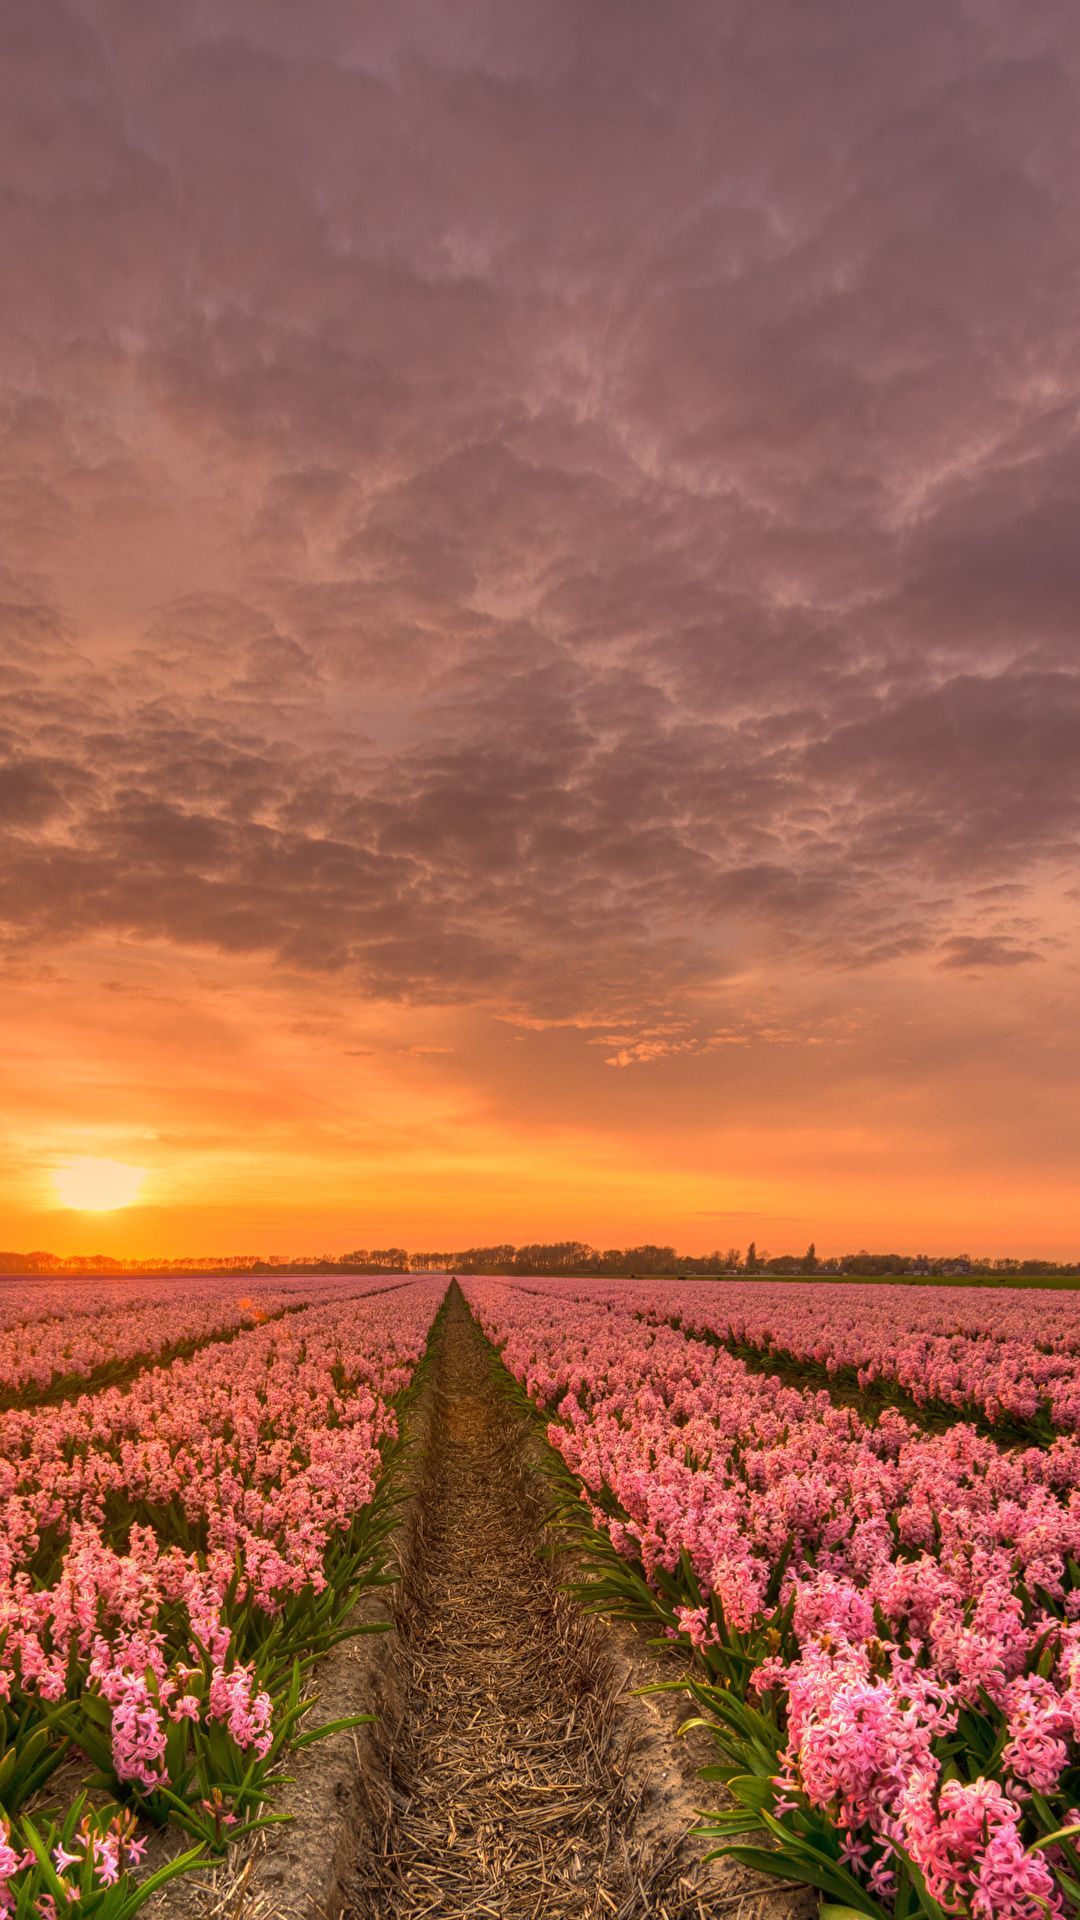 A dirt path leads through a field of pink flowers under a cloudy sky at sunset. - Sunset